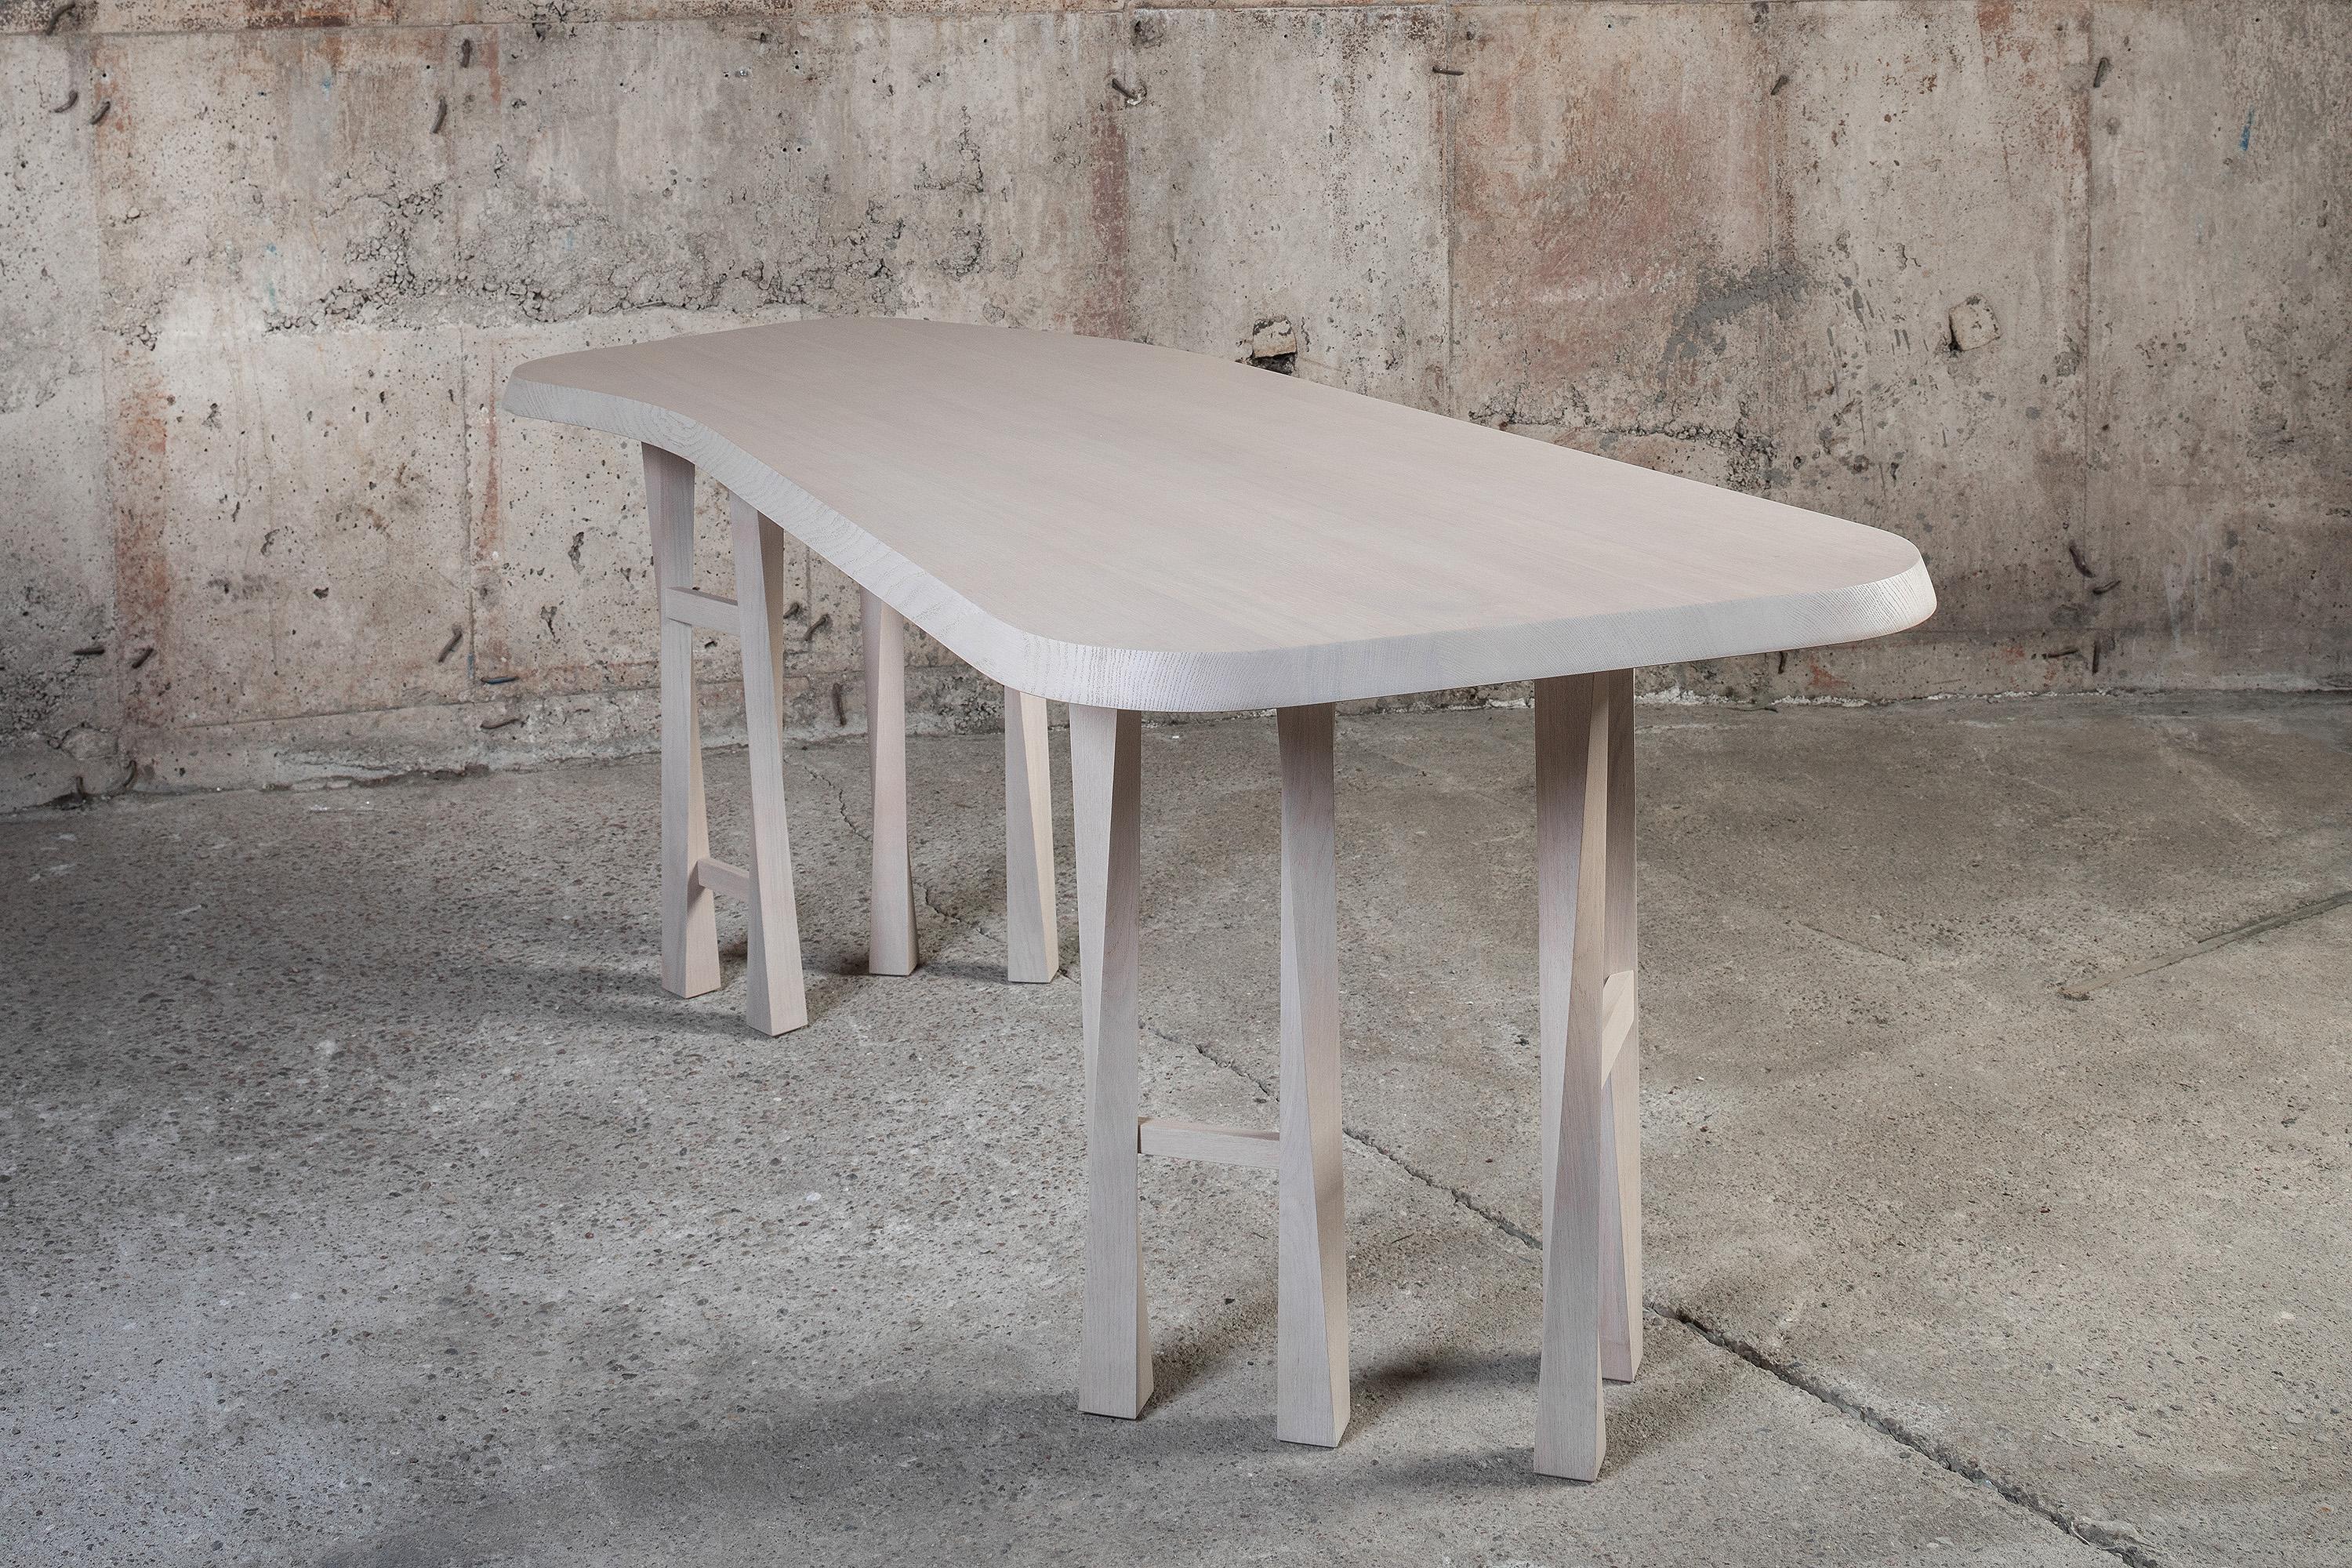 Contemporary Oak Desk - TWI Desk by Christophe Delcourt

Design: Christophe Delcourt
Material: Brushed Oak

This piece is a stunning example of designer Christophe Delcourt’s devotion to honouring materials and traditional craftsmanship, while